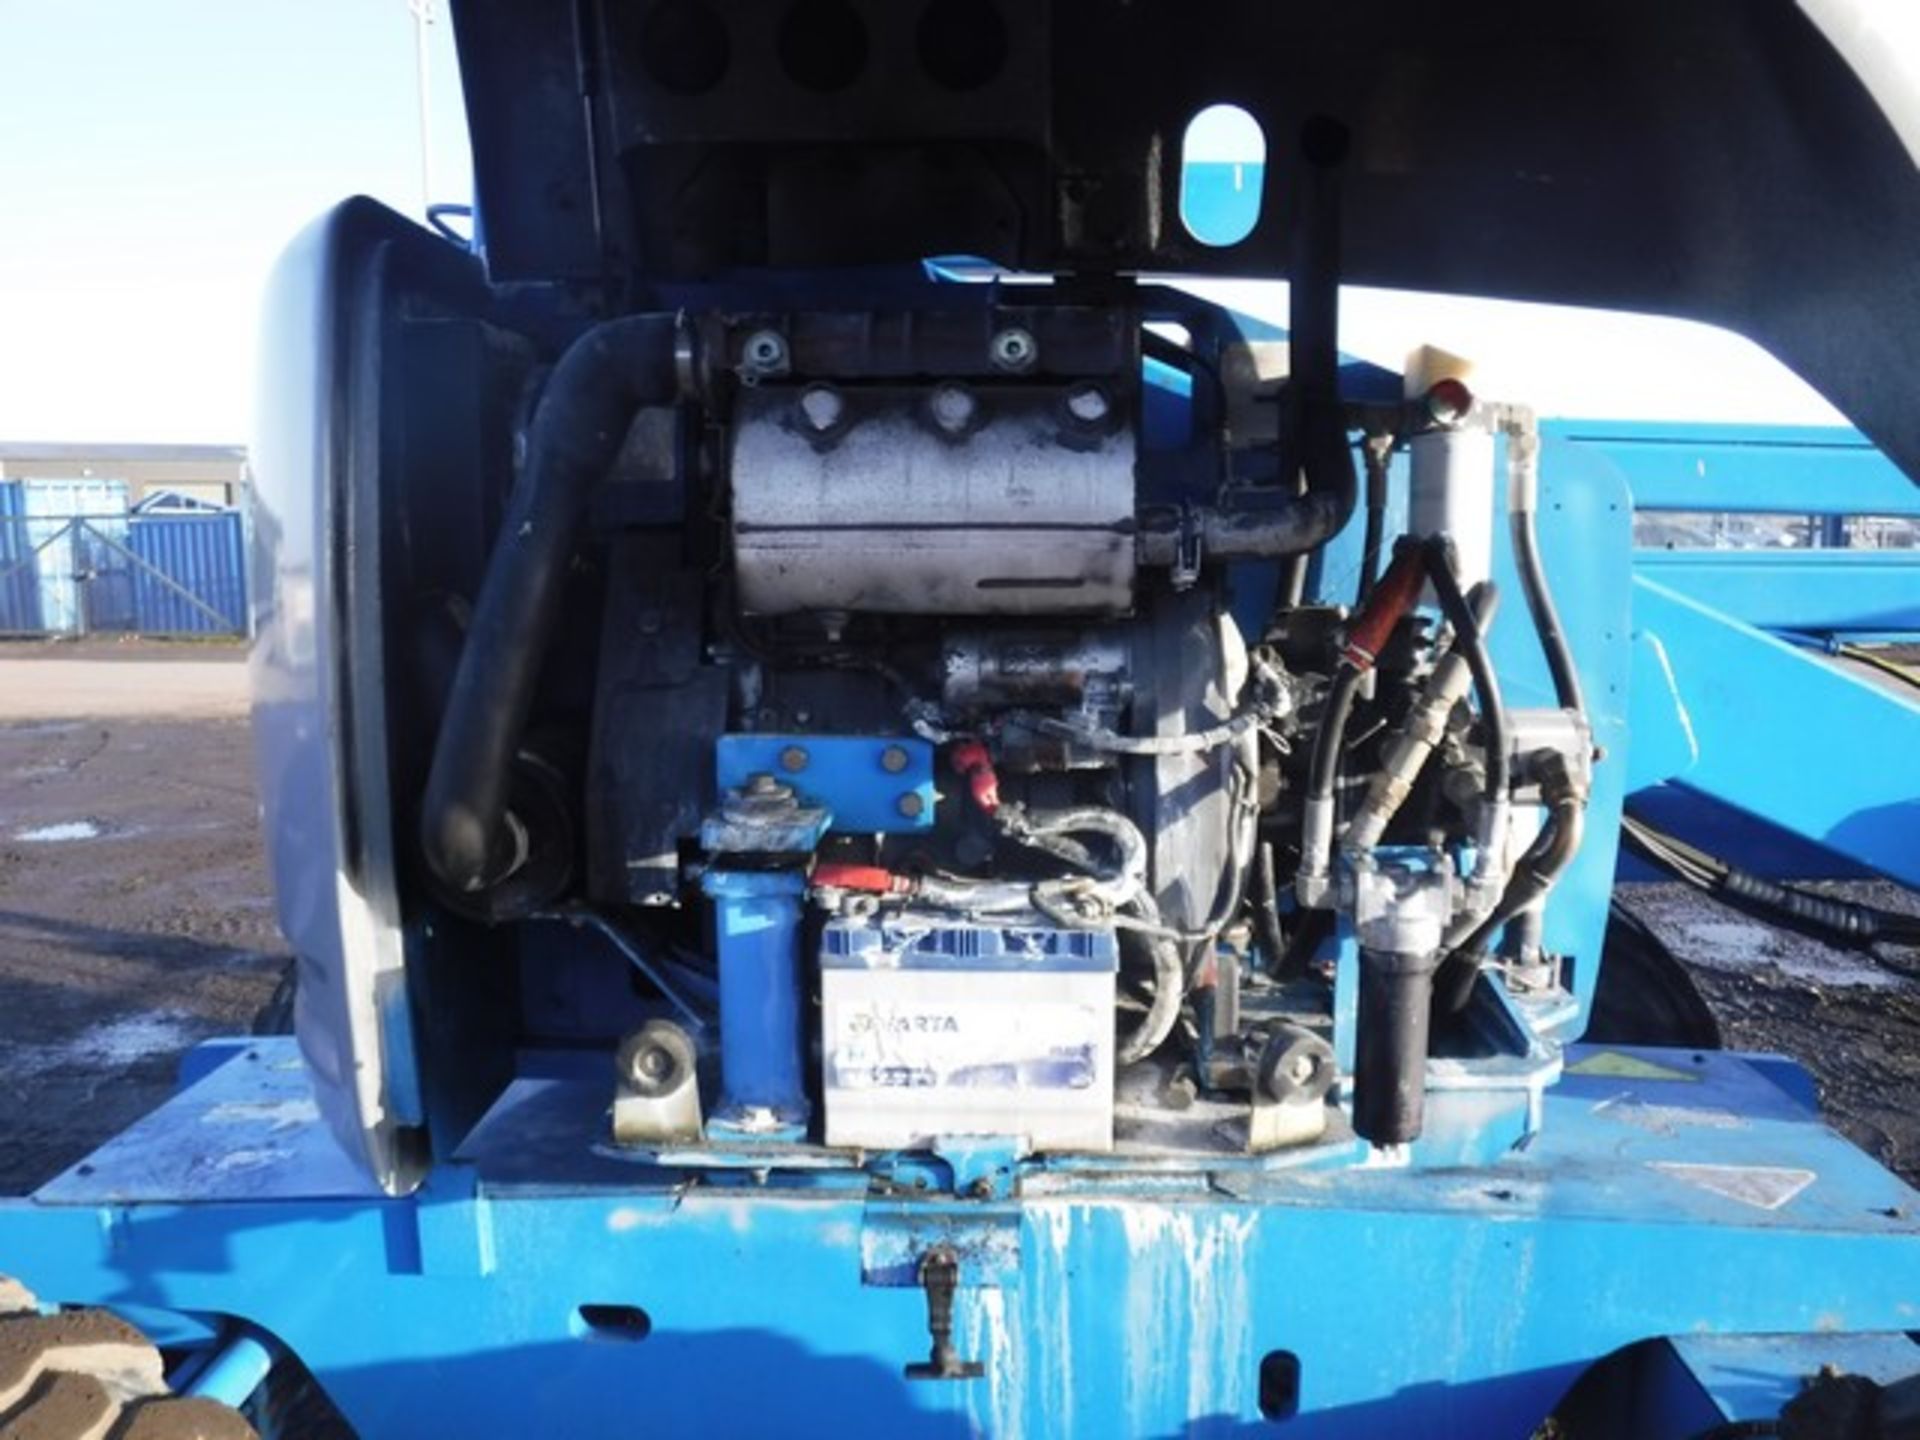 2000 GENIE MODEL Z45-25, S/N 15155, 8046HRS (NOT VERIFIED), LIFT CAPACITY - 230 - Image 4 of 17